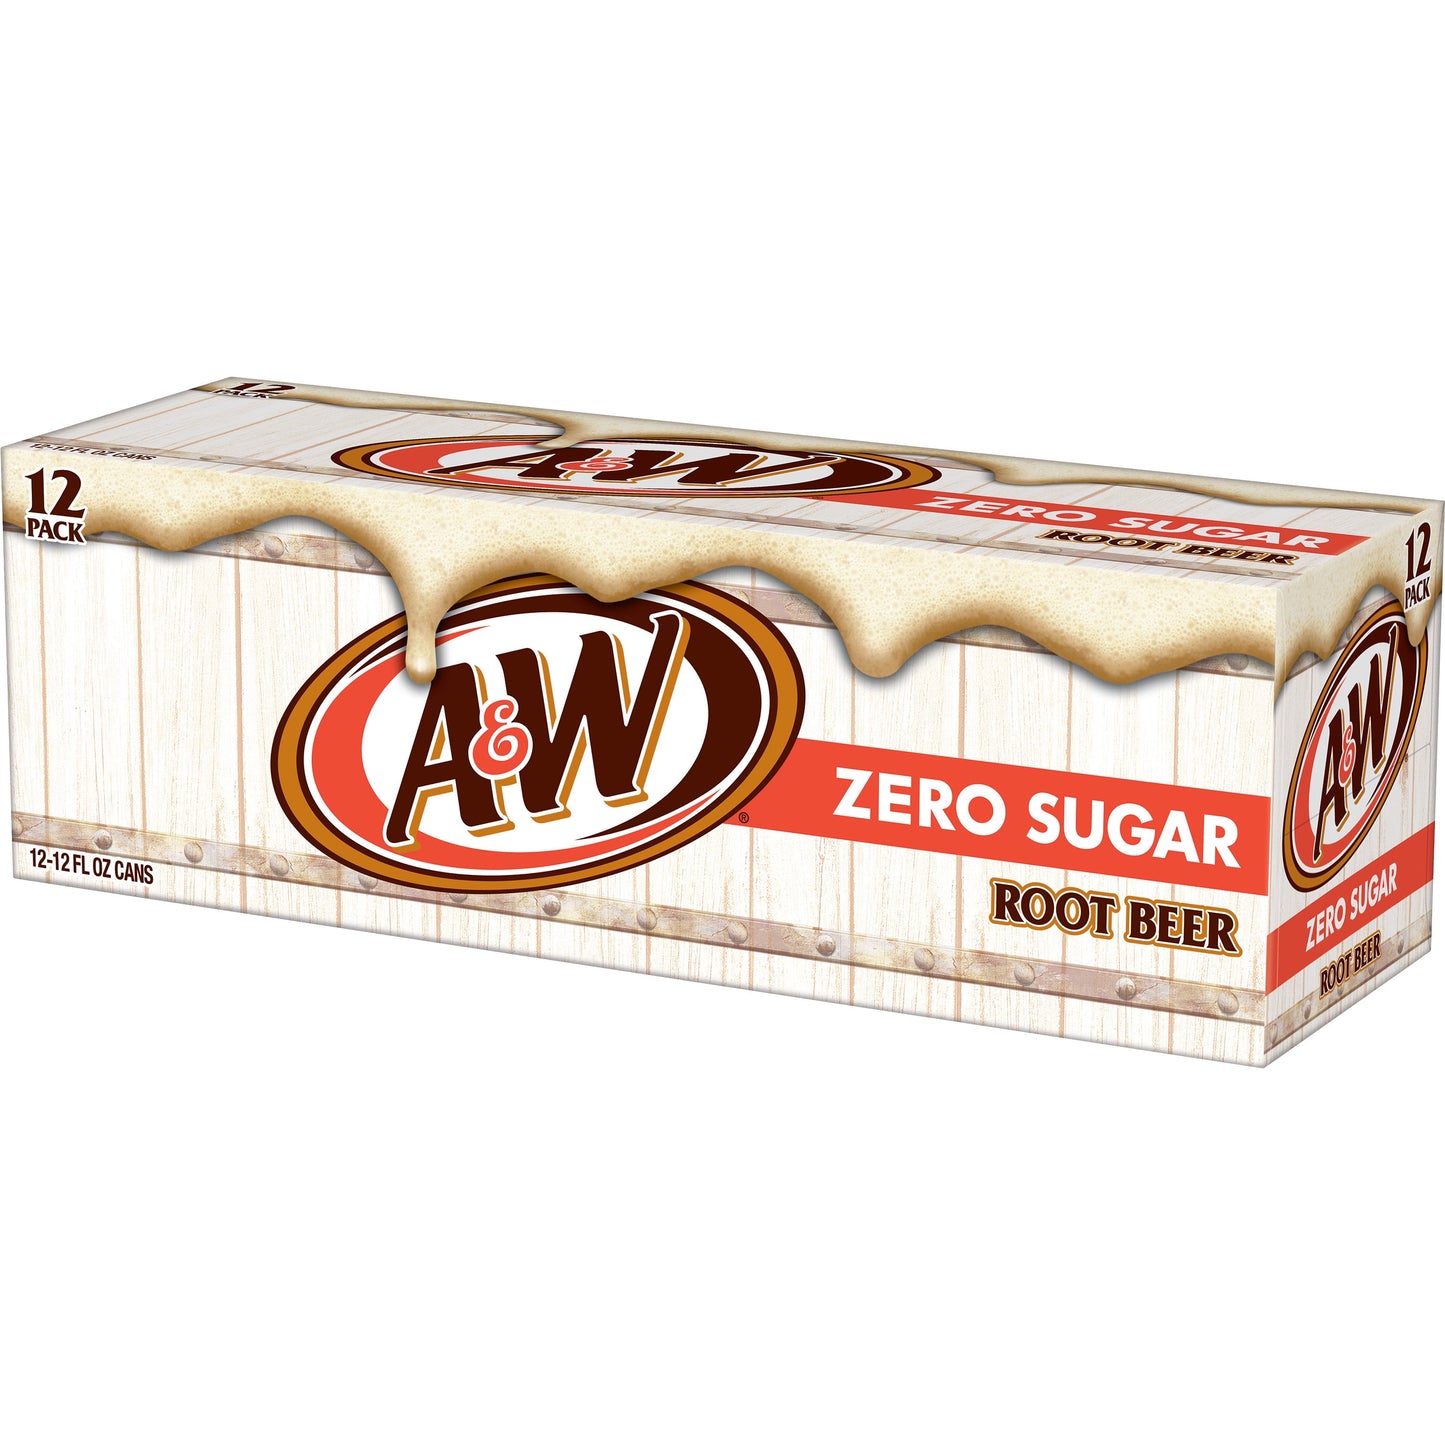 A&W Zero Sugar Root Beer Soda, 12 fl oz cans, 12 pack